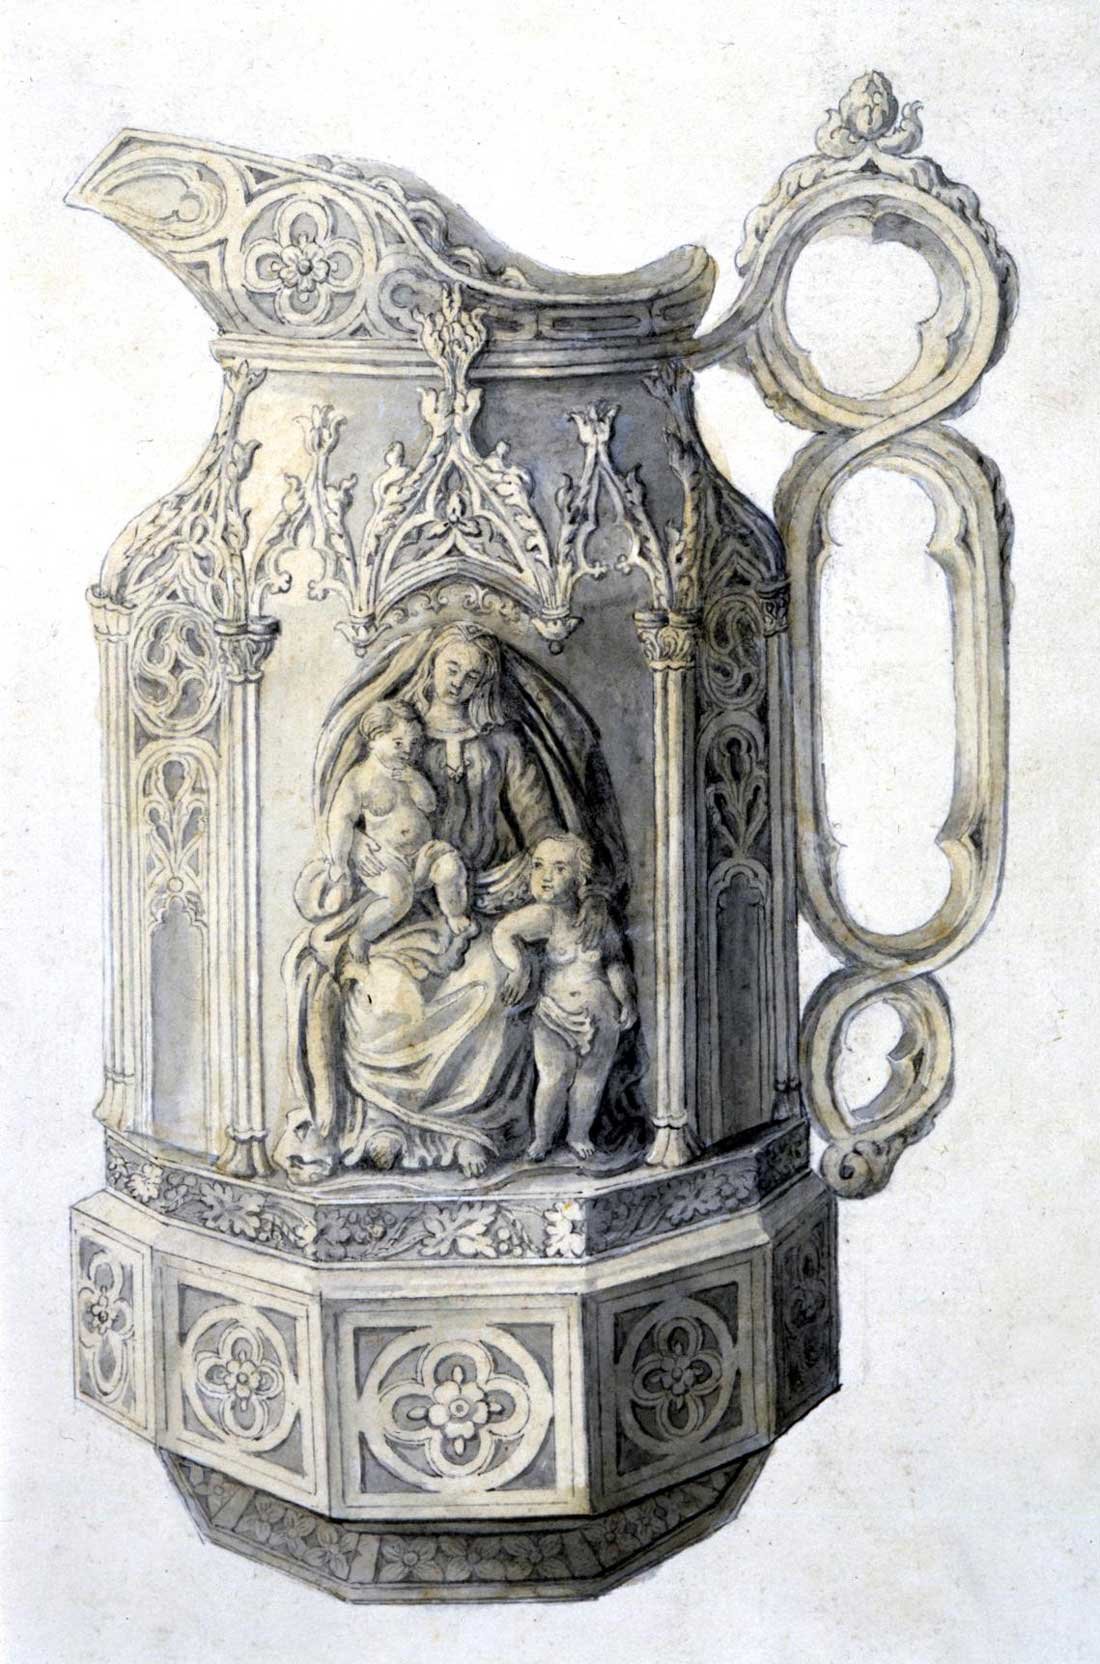 Black and white sketch of an extremely detailed, ornate jug featuring a woman with two naked infants